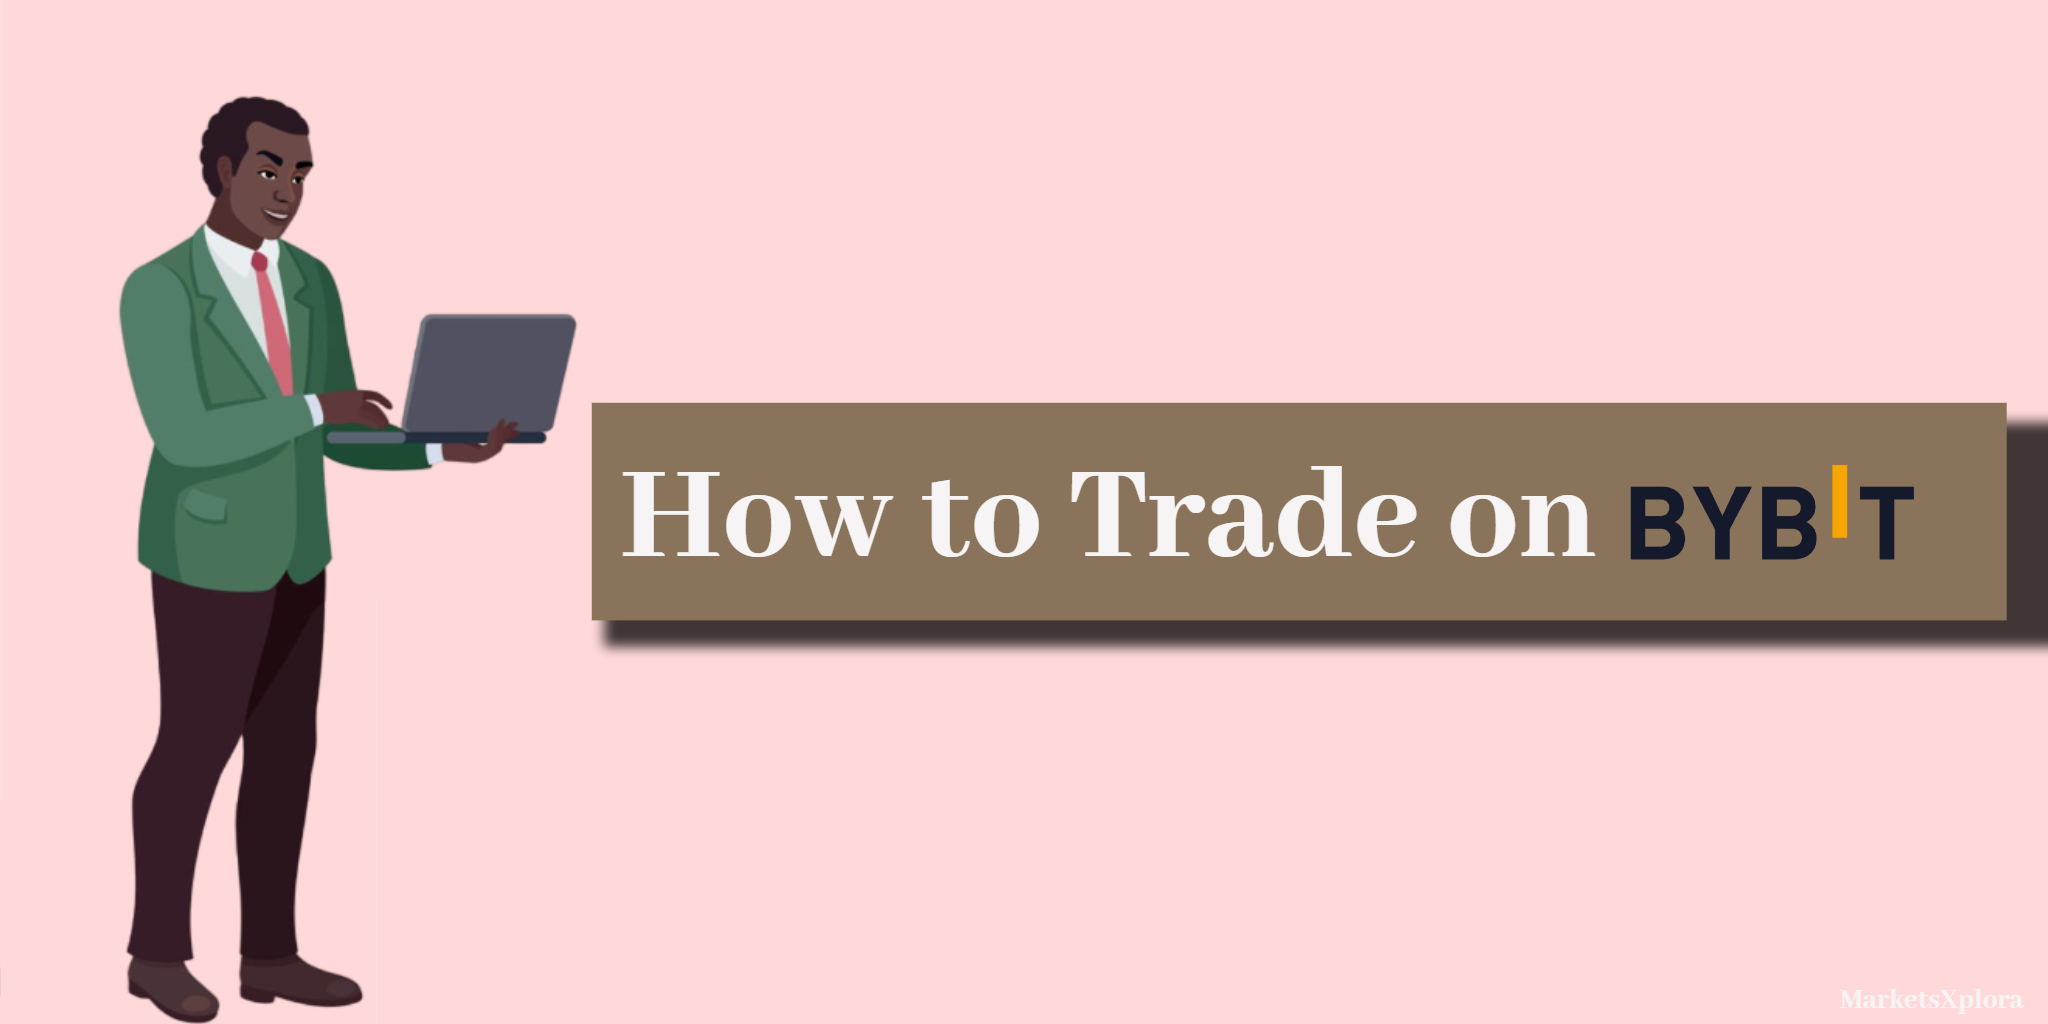 Learn How to Trade on Bybit for Beginners with this step-by-step guide. Discover how to create an account, deposit funds, navigate the trading interface, and more.